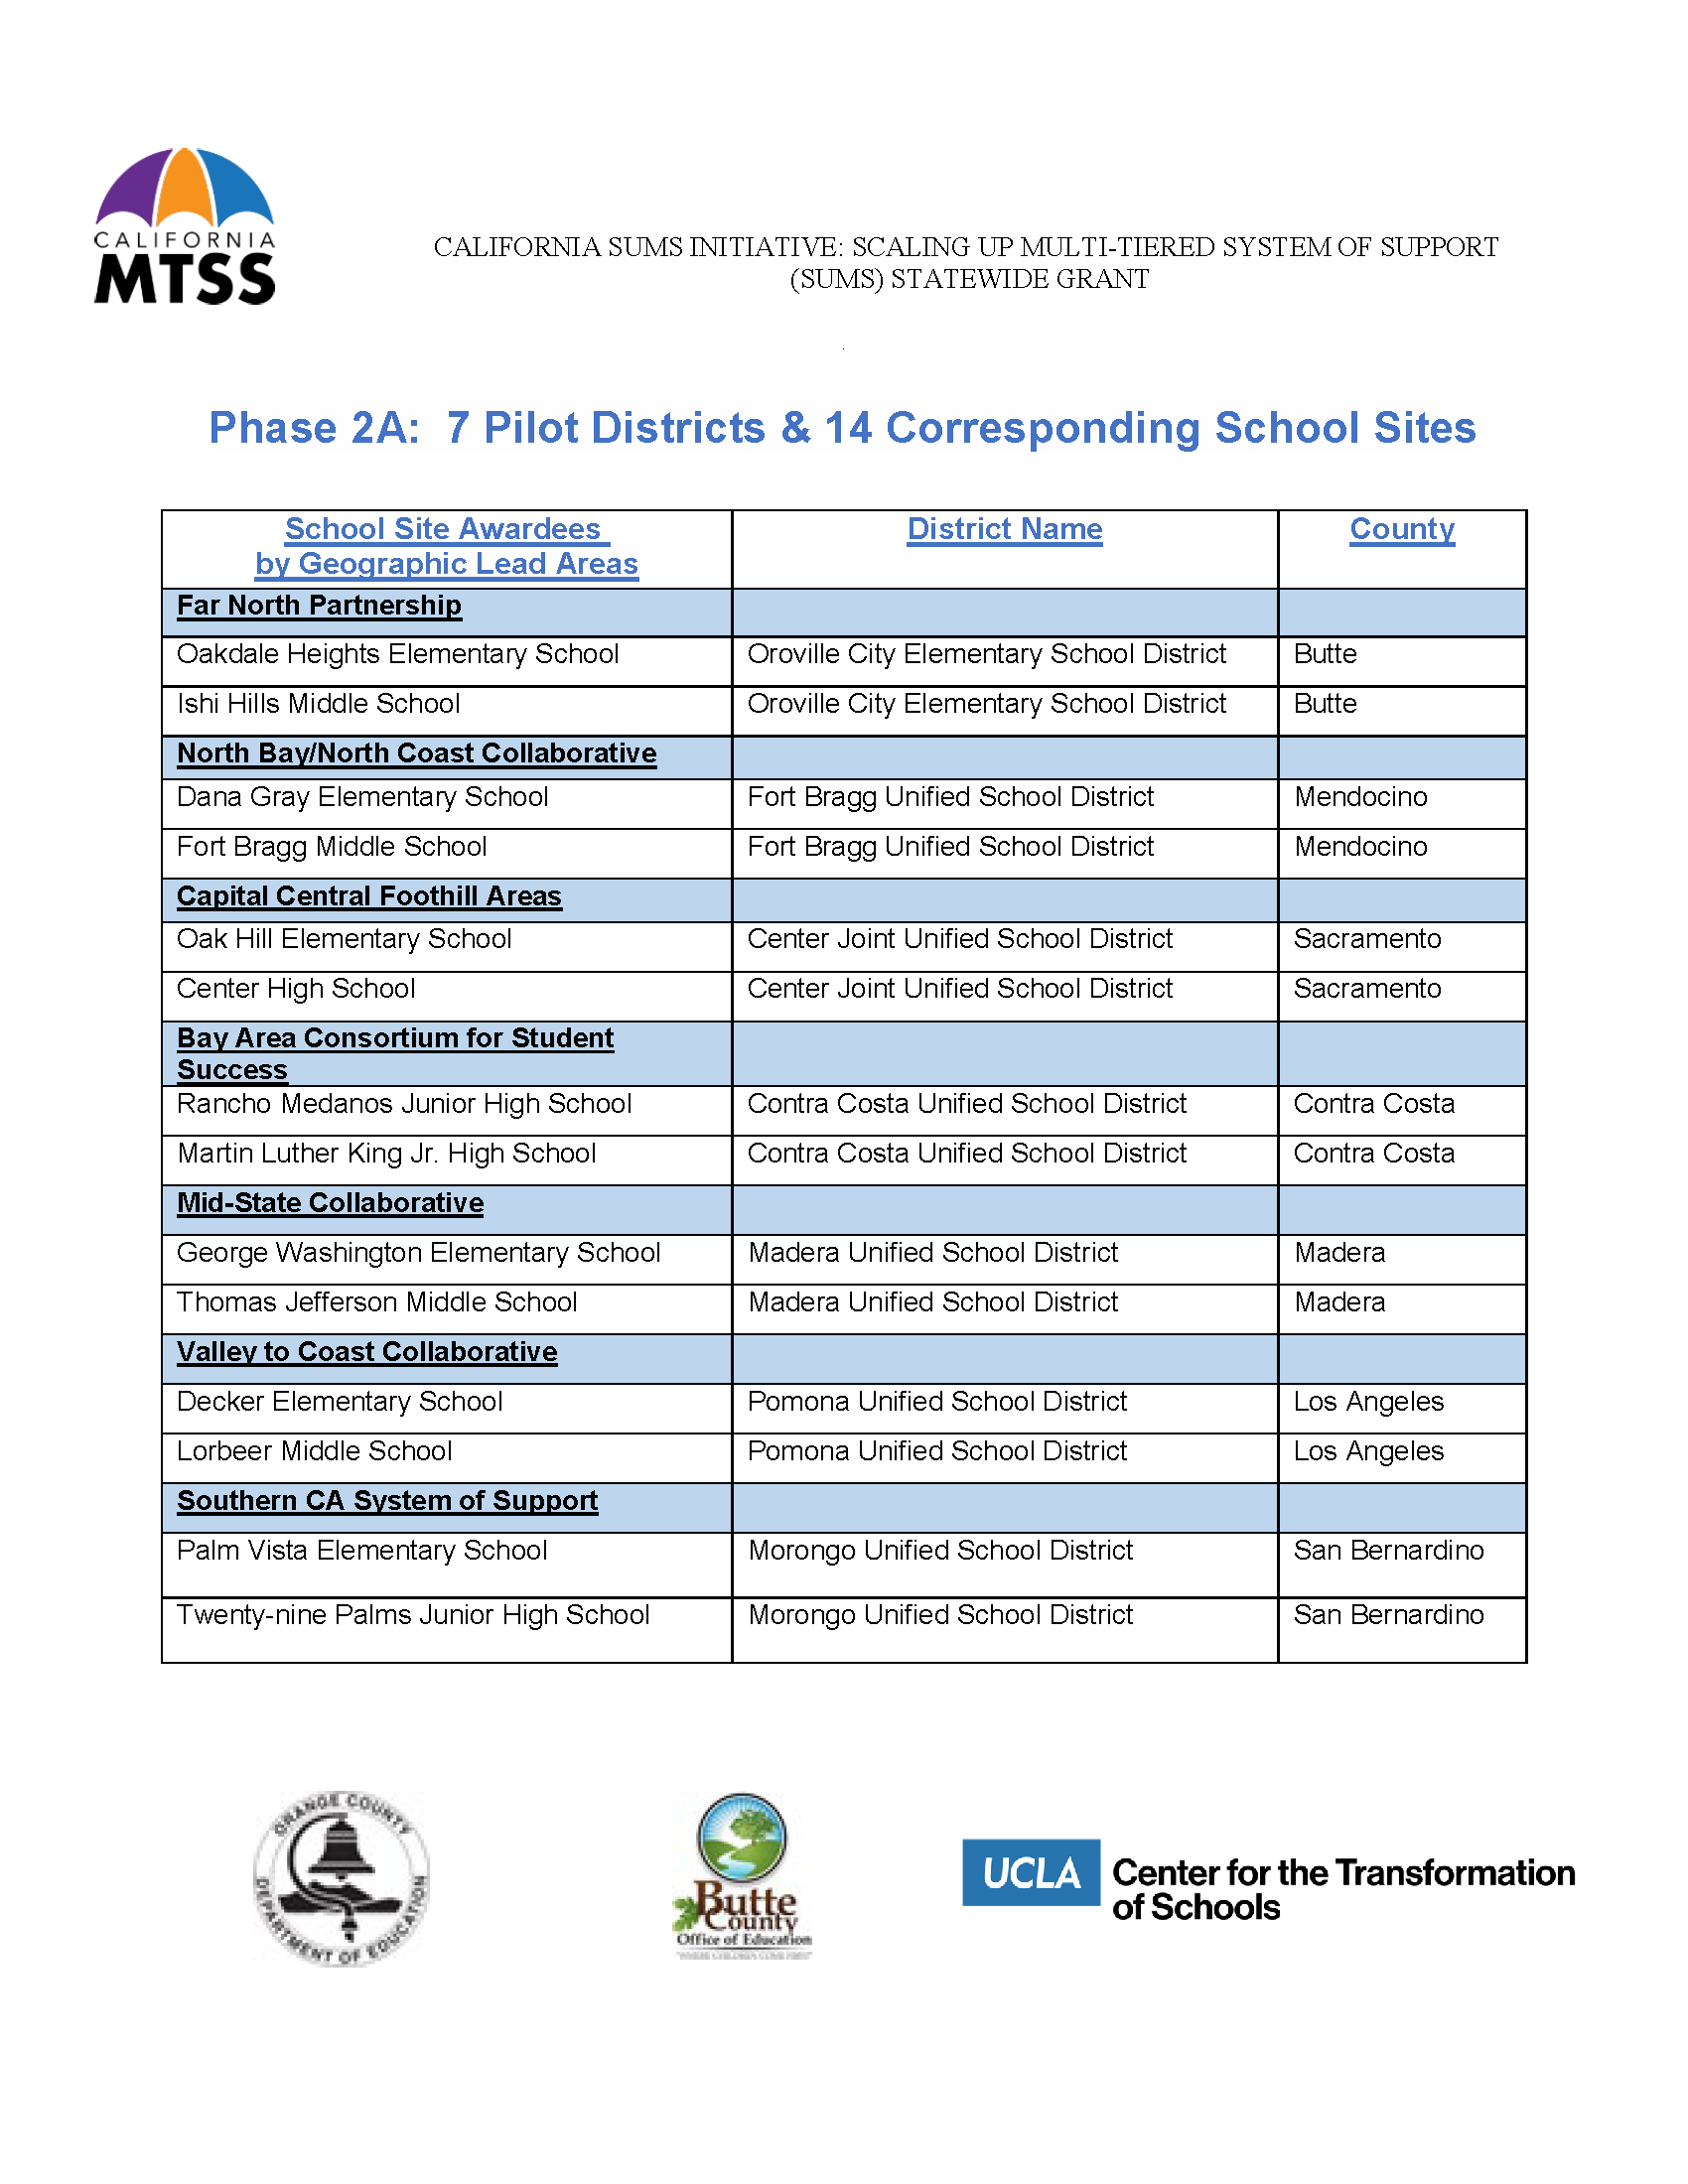 Phase 2A 7 Pilot Districts & 14 Corresponding School Sites.png